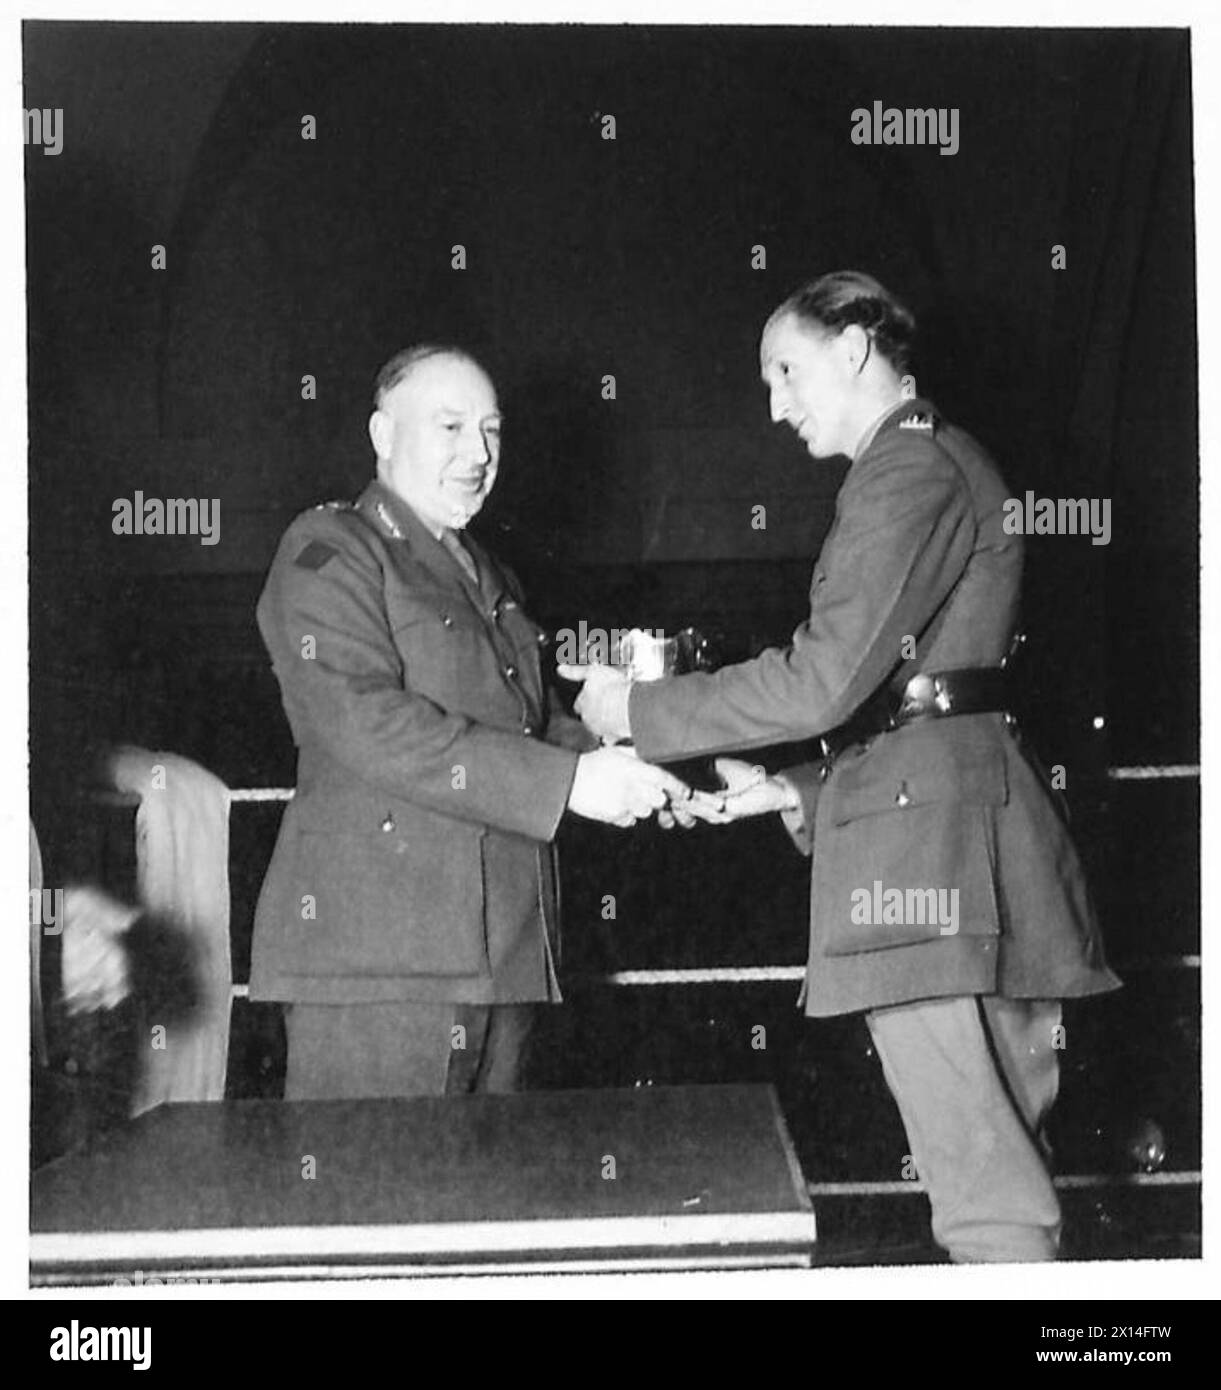 MILITARY BOXING TOURNAMENT - Prize giving in the ring after the boxing (left) Lt. Gen. E.W. Sanson, DSO, GOC of 2nd Canadian Corps presenting the Bowl to (right) Capt E.H. Leathers the Captain of the Canadian Army (Overseas) Team - the winners British Army Stock Photo